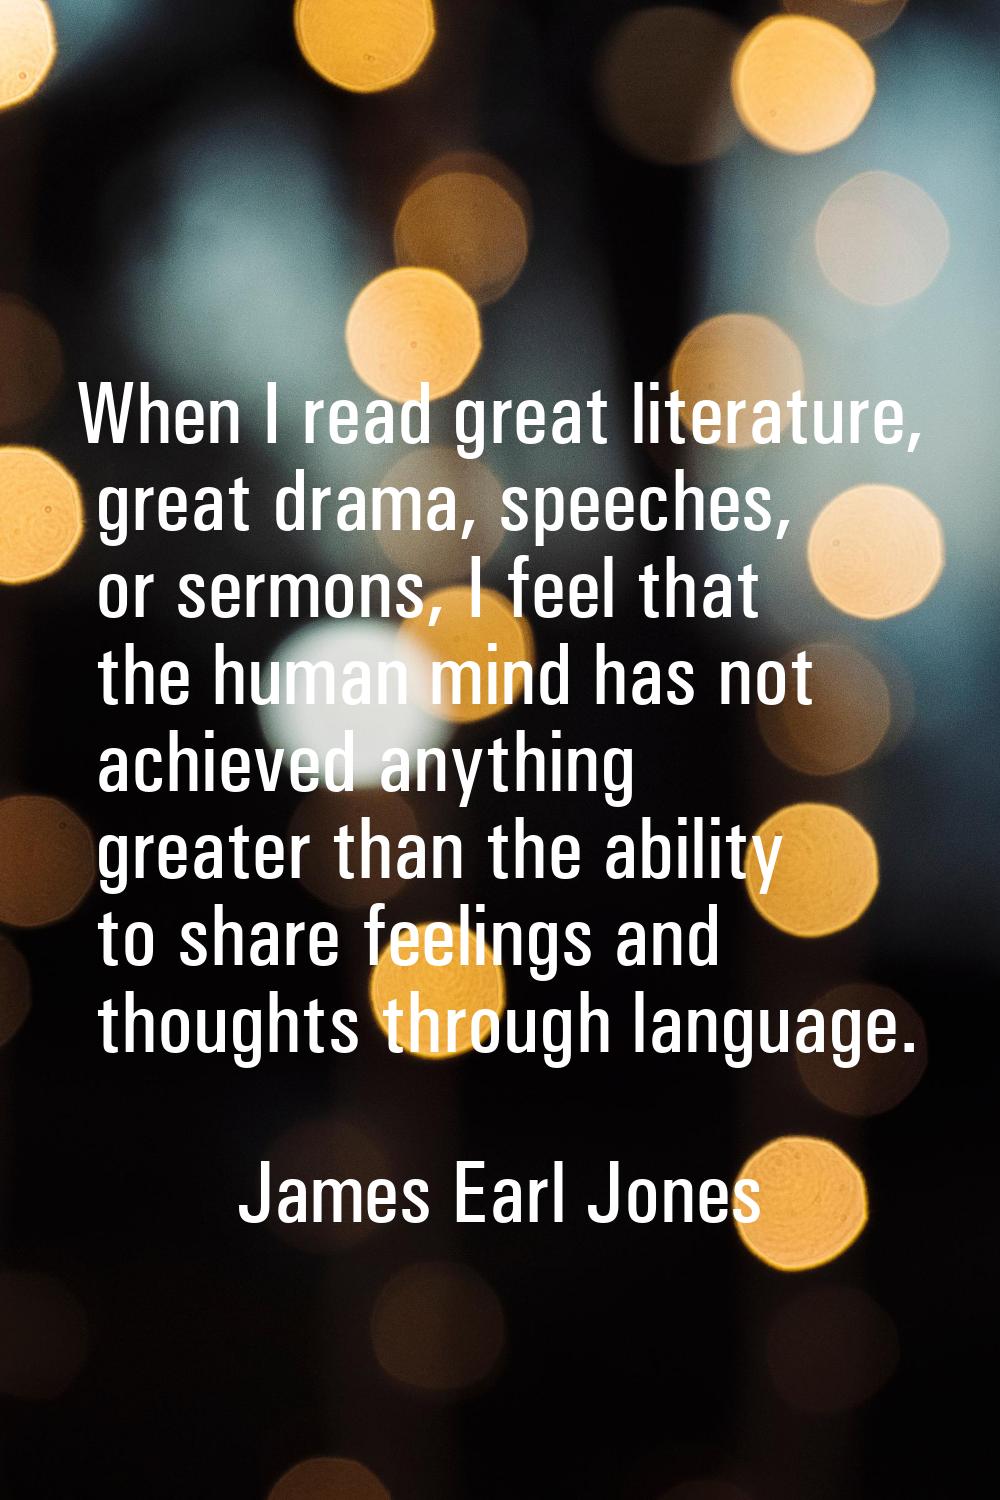 When I read great literature, great drama, speeches, or sermons, I feel that the human mind has not